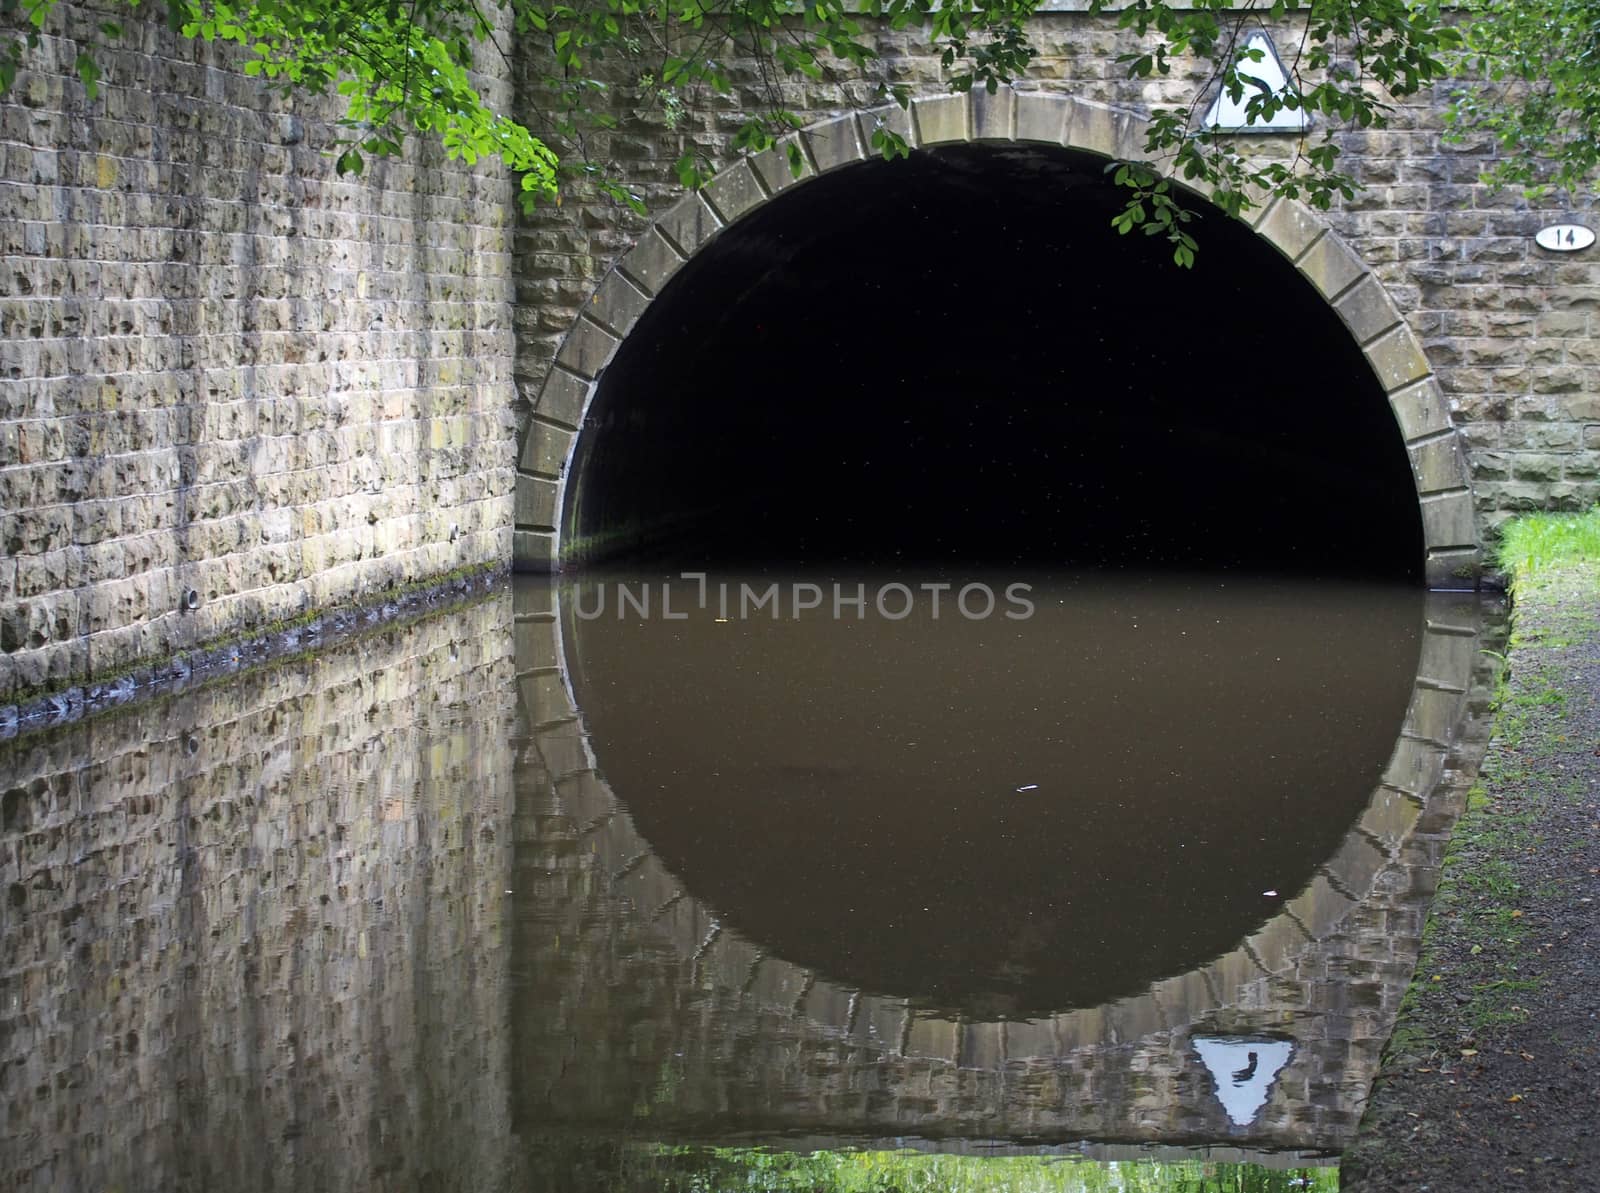 fallingroyd tunnel on the rochdale canal in hebden bridge built to carry the canal under the a58 road